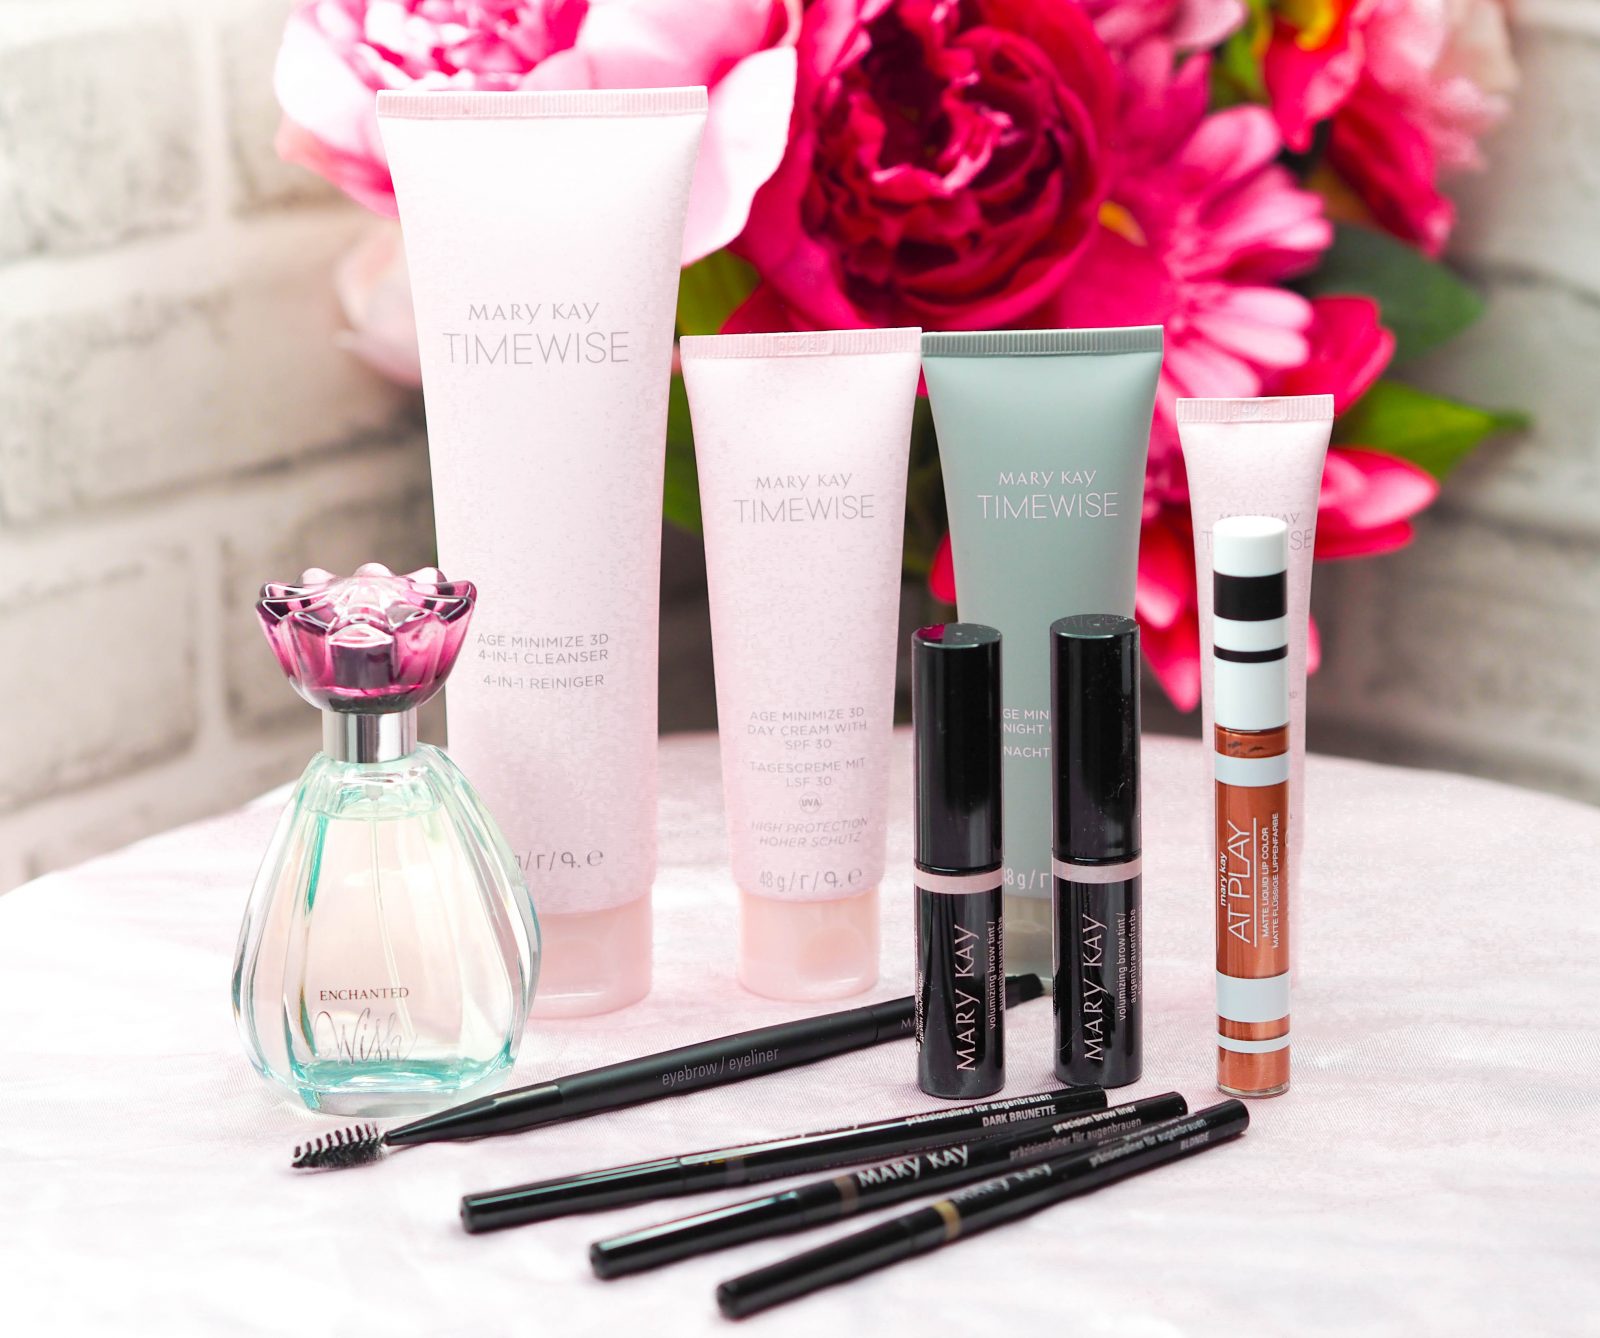 recent-launches-from-mary-kay-beauty-geek-uk